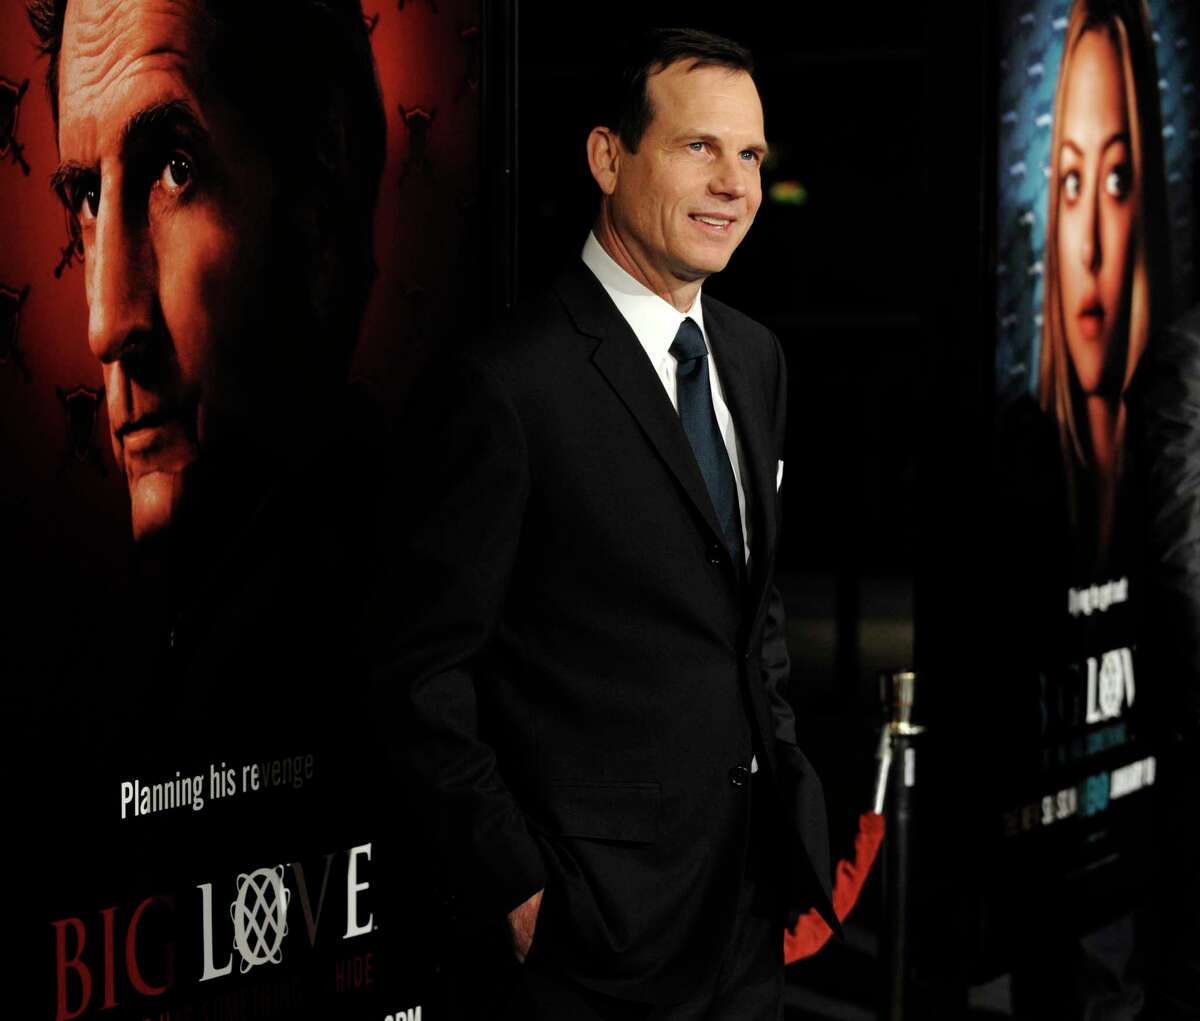 FILE - In this Wednesday, Jan. 14, 2009, file photo, Bill Paxton, a cast member in the HBO series "Big Love," poses at the show's third season premiere in Los Angeles. A family representative said prolific and charismatic actor Paxton, who played an astronaut in "Apollo 13" and a treasure hunter in "Titanic," died from complications due to surgery. The family representative issued a statement Sunday, Feb. 26, 2017, on the death. (AP Photo/Chris Pizzello, File)